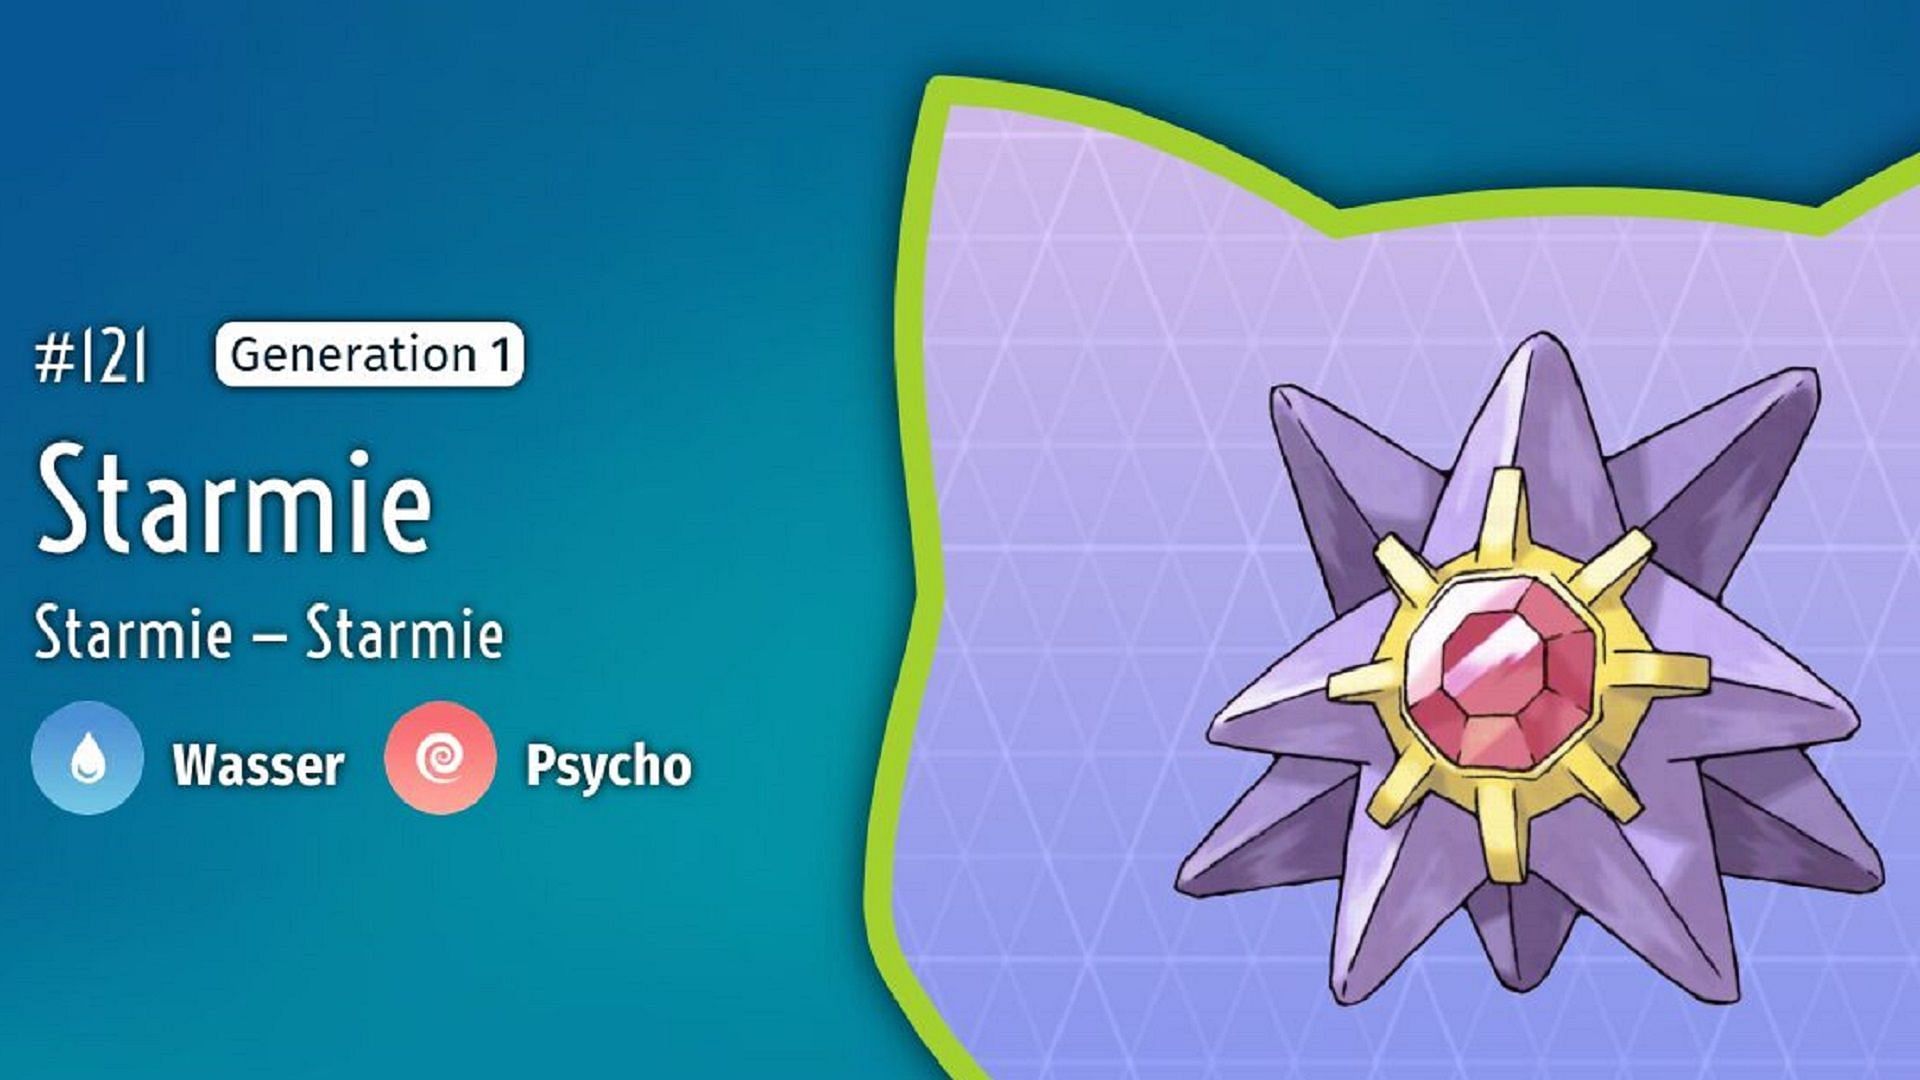 Starmie is a Water/Psychic-type in Pokemon GO (Image via The Pokemon Company)